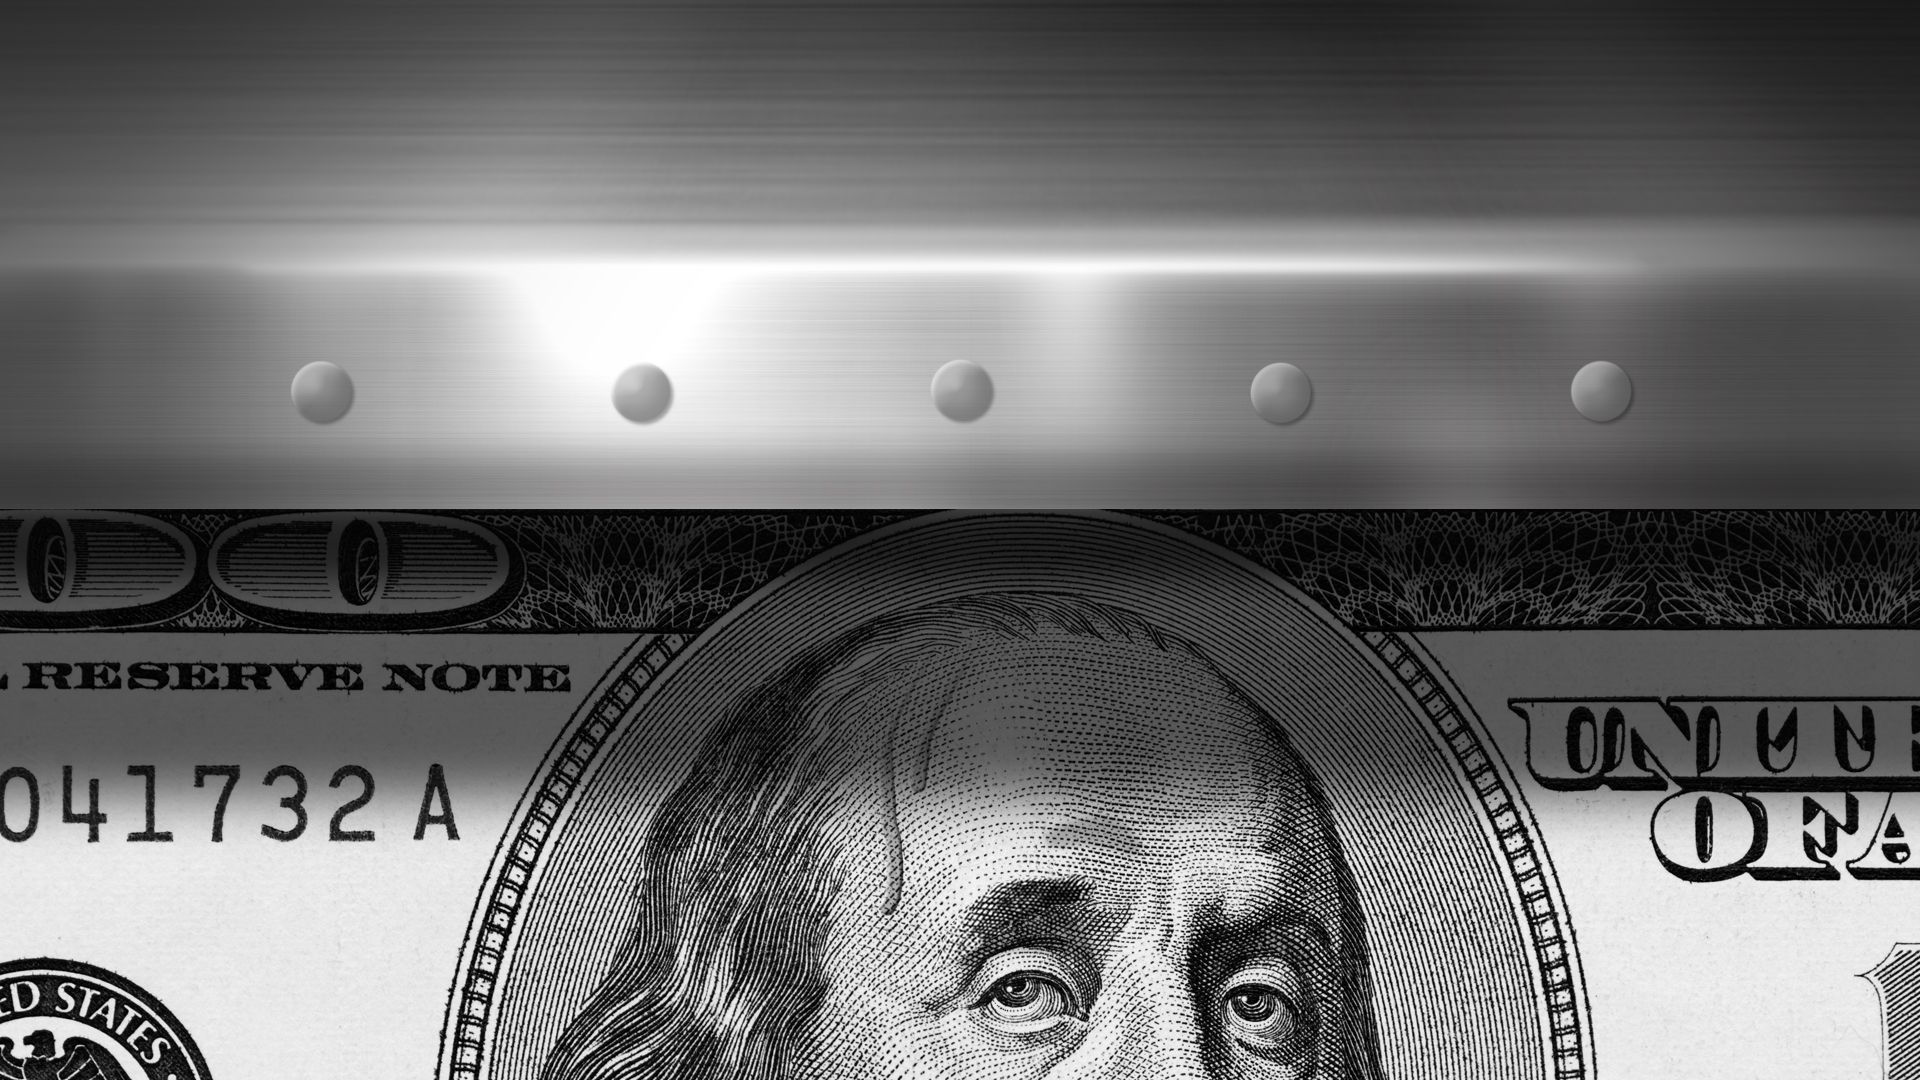 Illustration of a nervous-looking Ben Franklin on a twenty dollar bill looking up at a metal ceiling